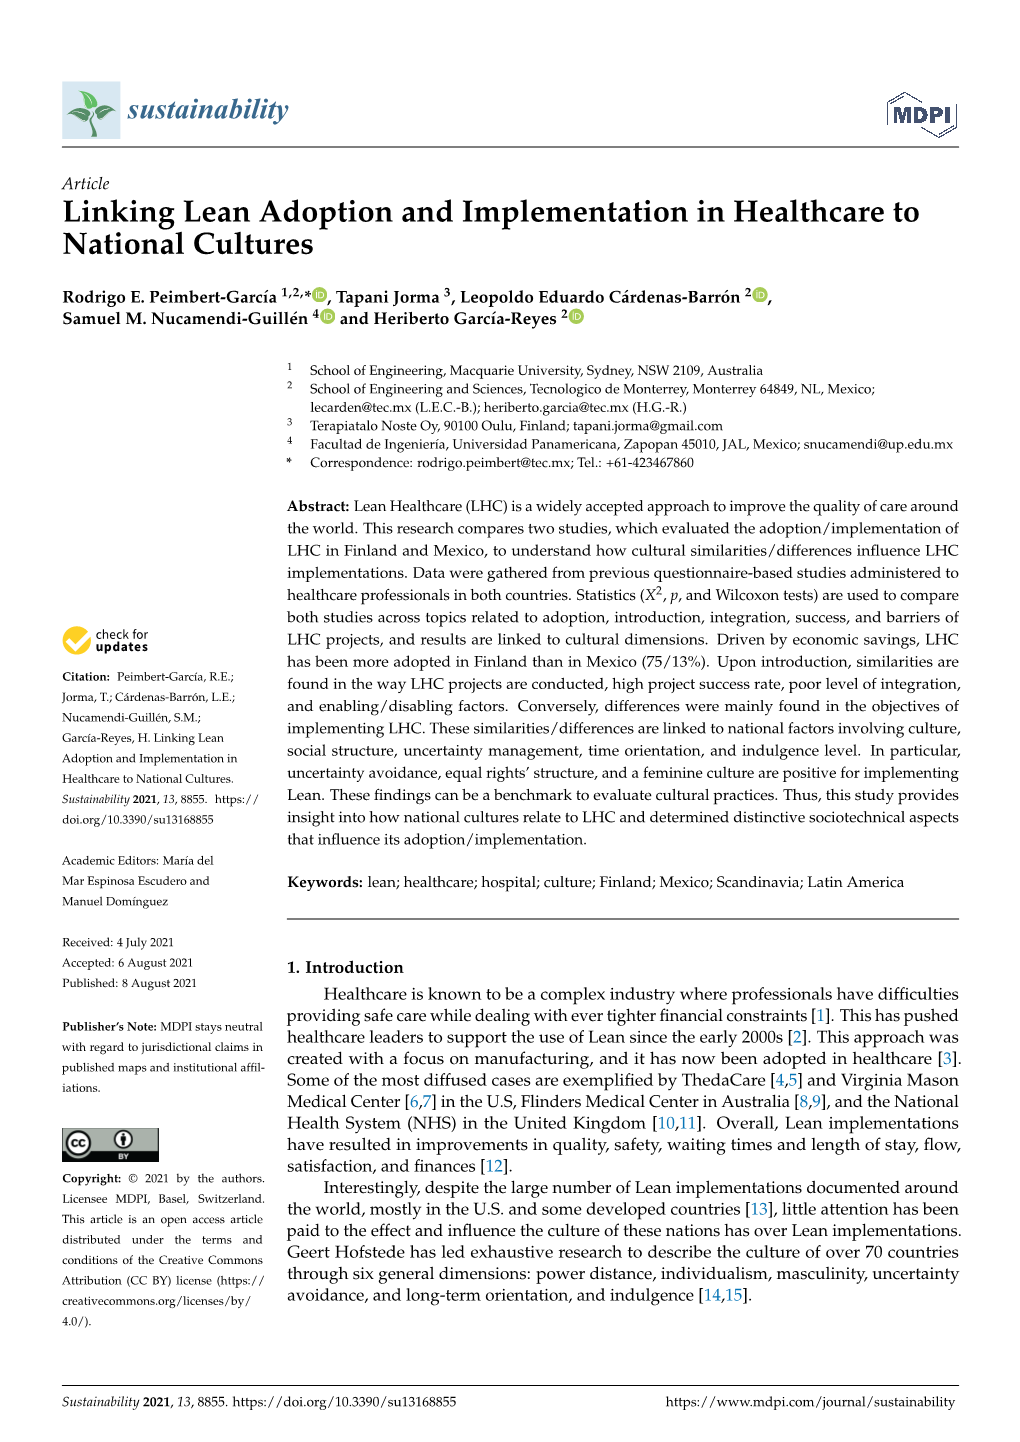 Linking Lean Adoption and Implementation in Healthcare to National Cultures